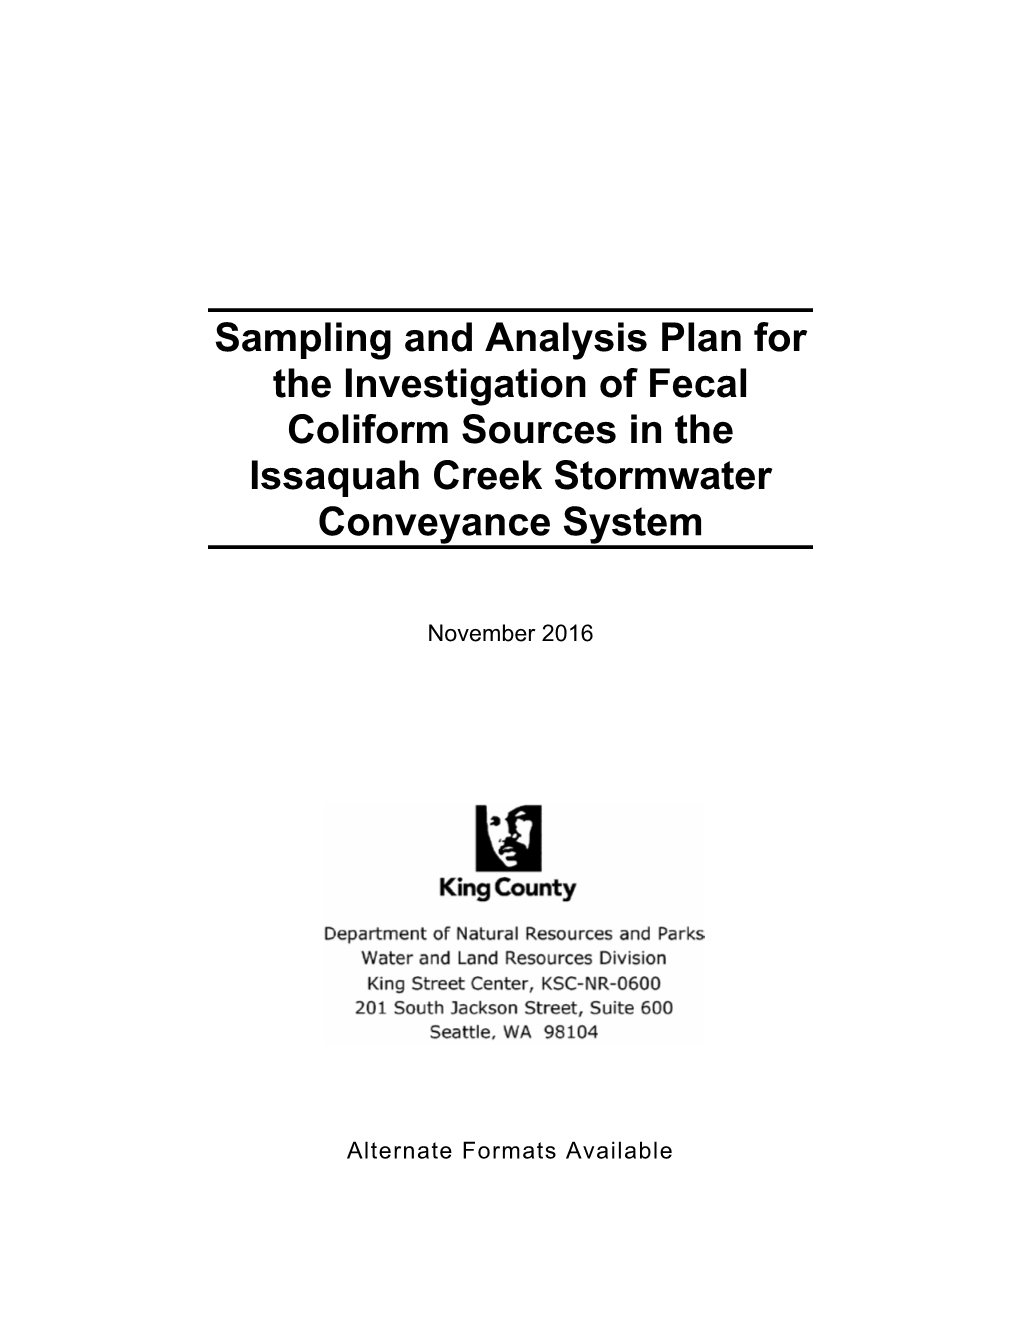 Sampling and Analysis Plan for the Investigation of Fecal Coliform Sources in the Issaquah Creek Stormwater Conveyance System